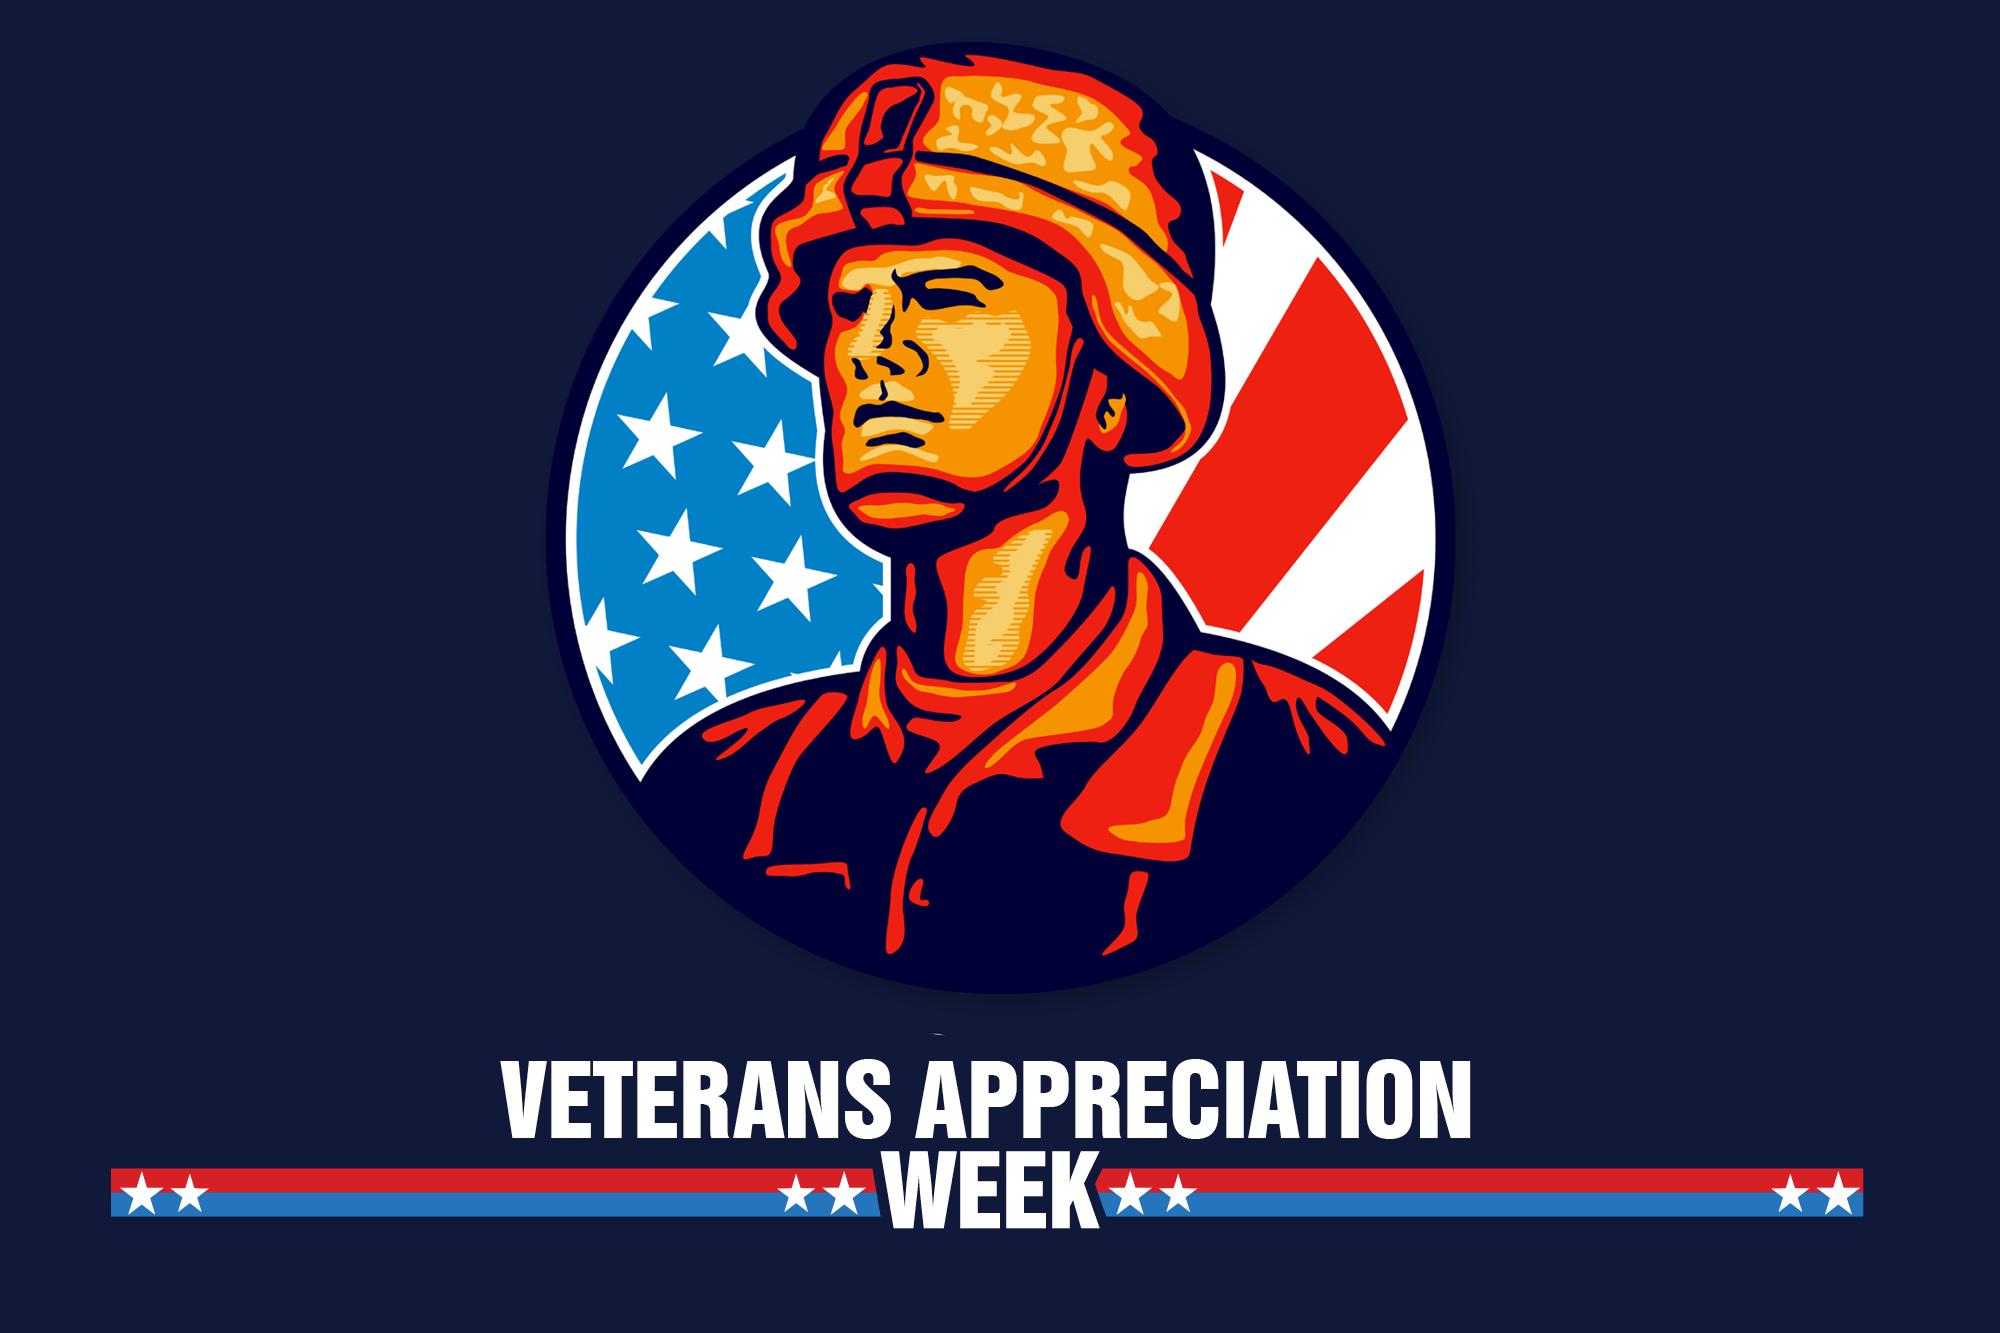 Artwork of a soldier against a background of the American flag wit the words "Veterans Appreciation Week."